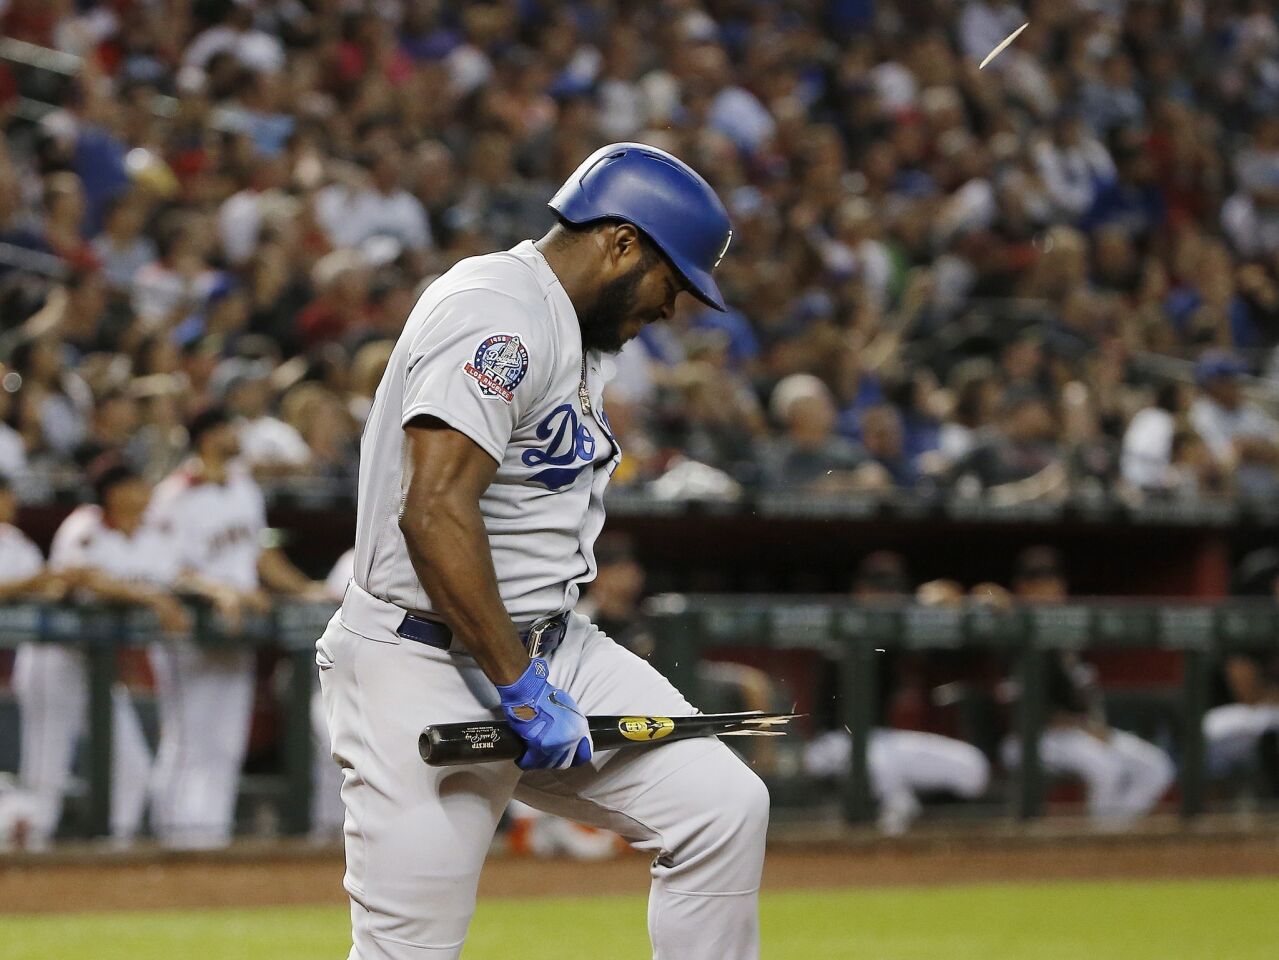 Los Angeles Dodgers' Yasiel Puig breaks his bat over his leg after flyiing out against the Arizona Diamondbacks during the fifth inning of a baseball game Wednesday, Sept. 26, 2018, in Phoenix. (AP Photo/Ross D. Franklin)